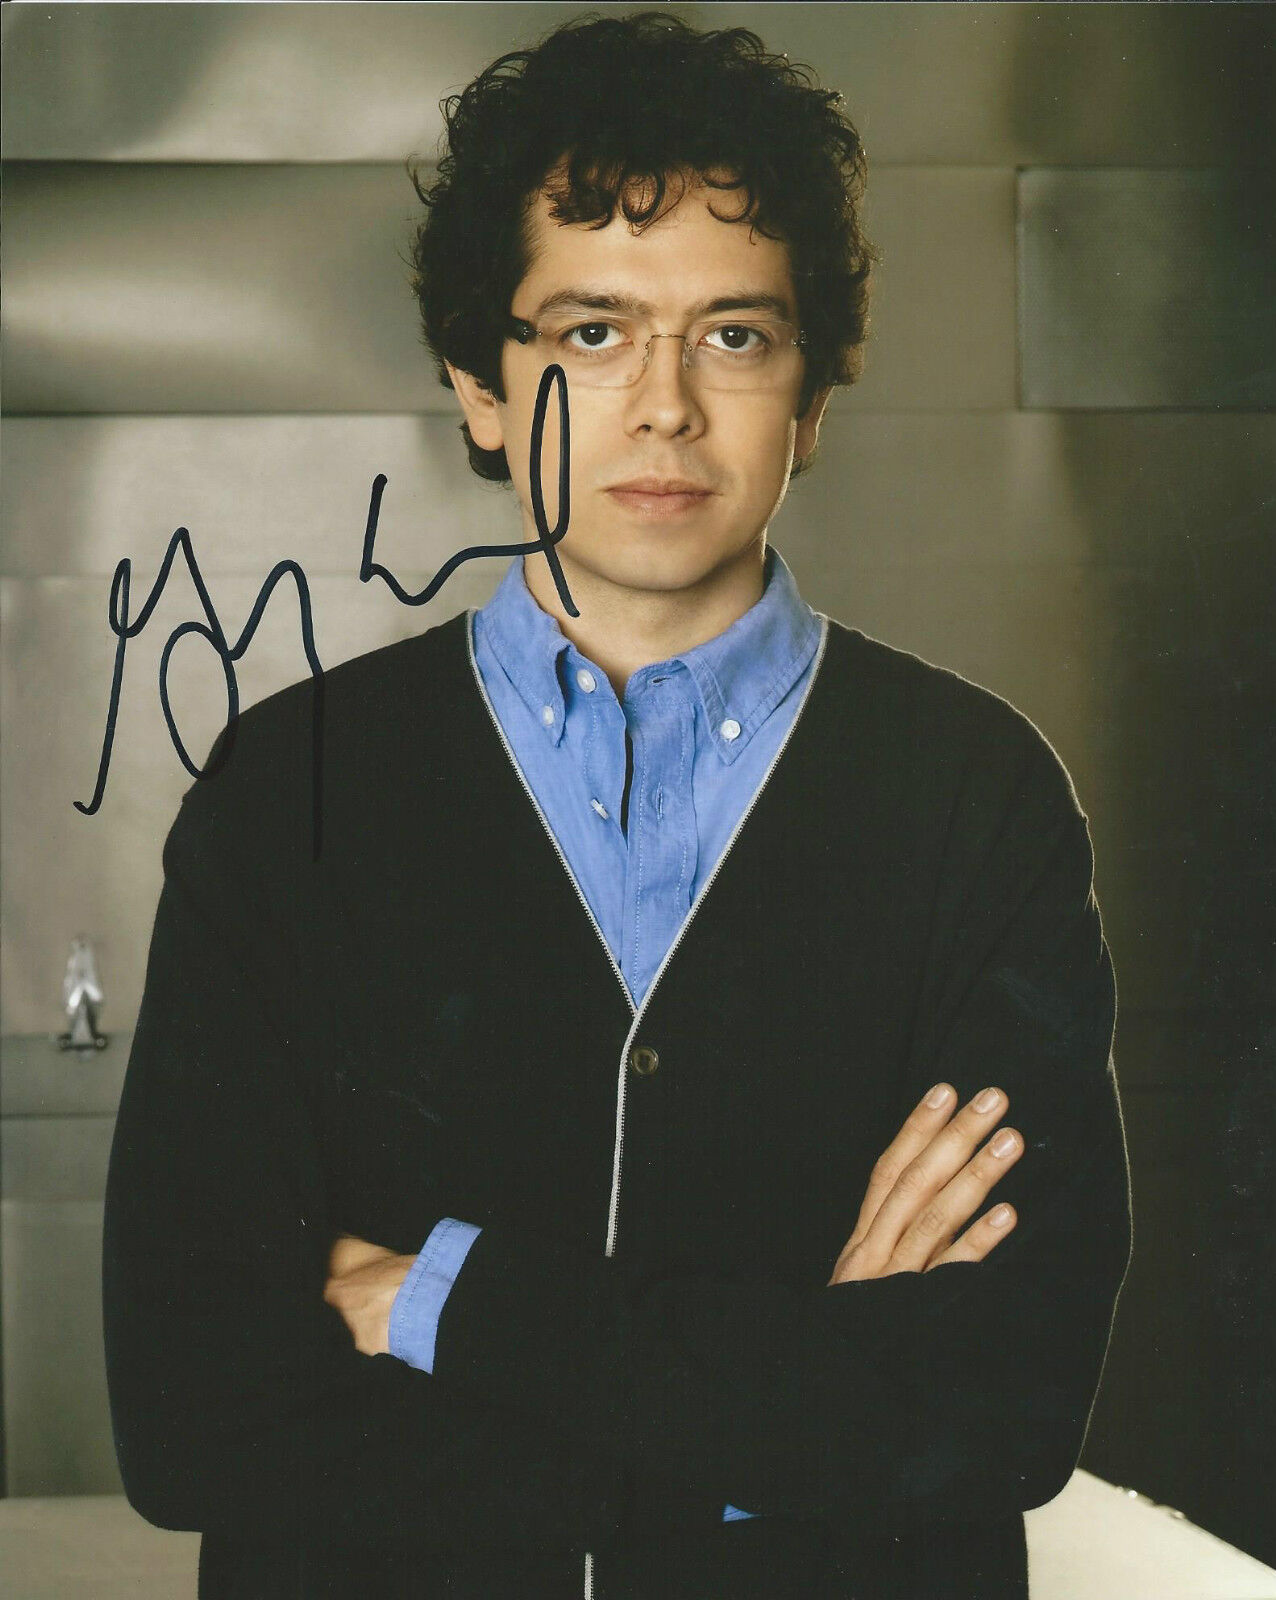 **GFA Super Troopers Movie *GEOFFREY AREND* Signed 8x10 Photo Poster painting MH4 COA**